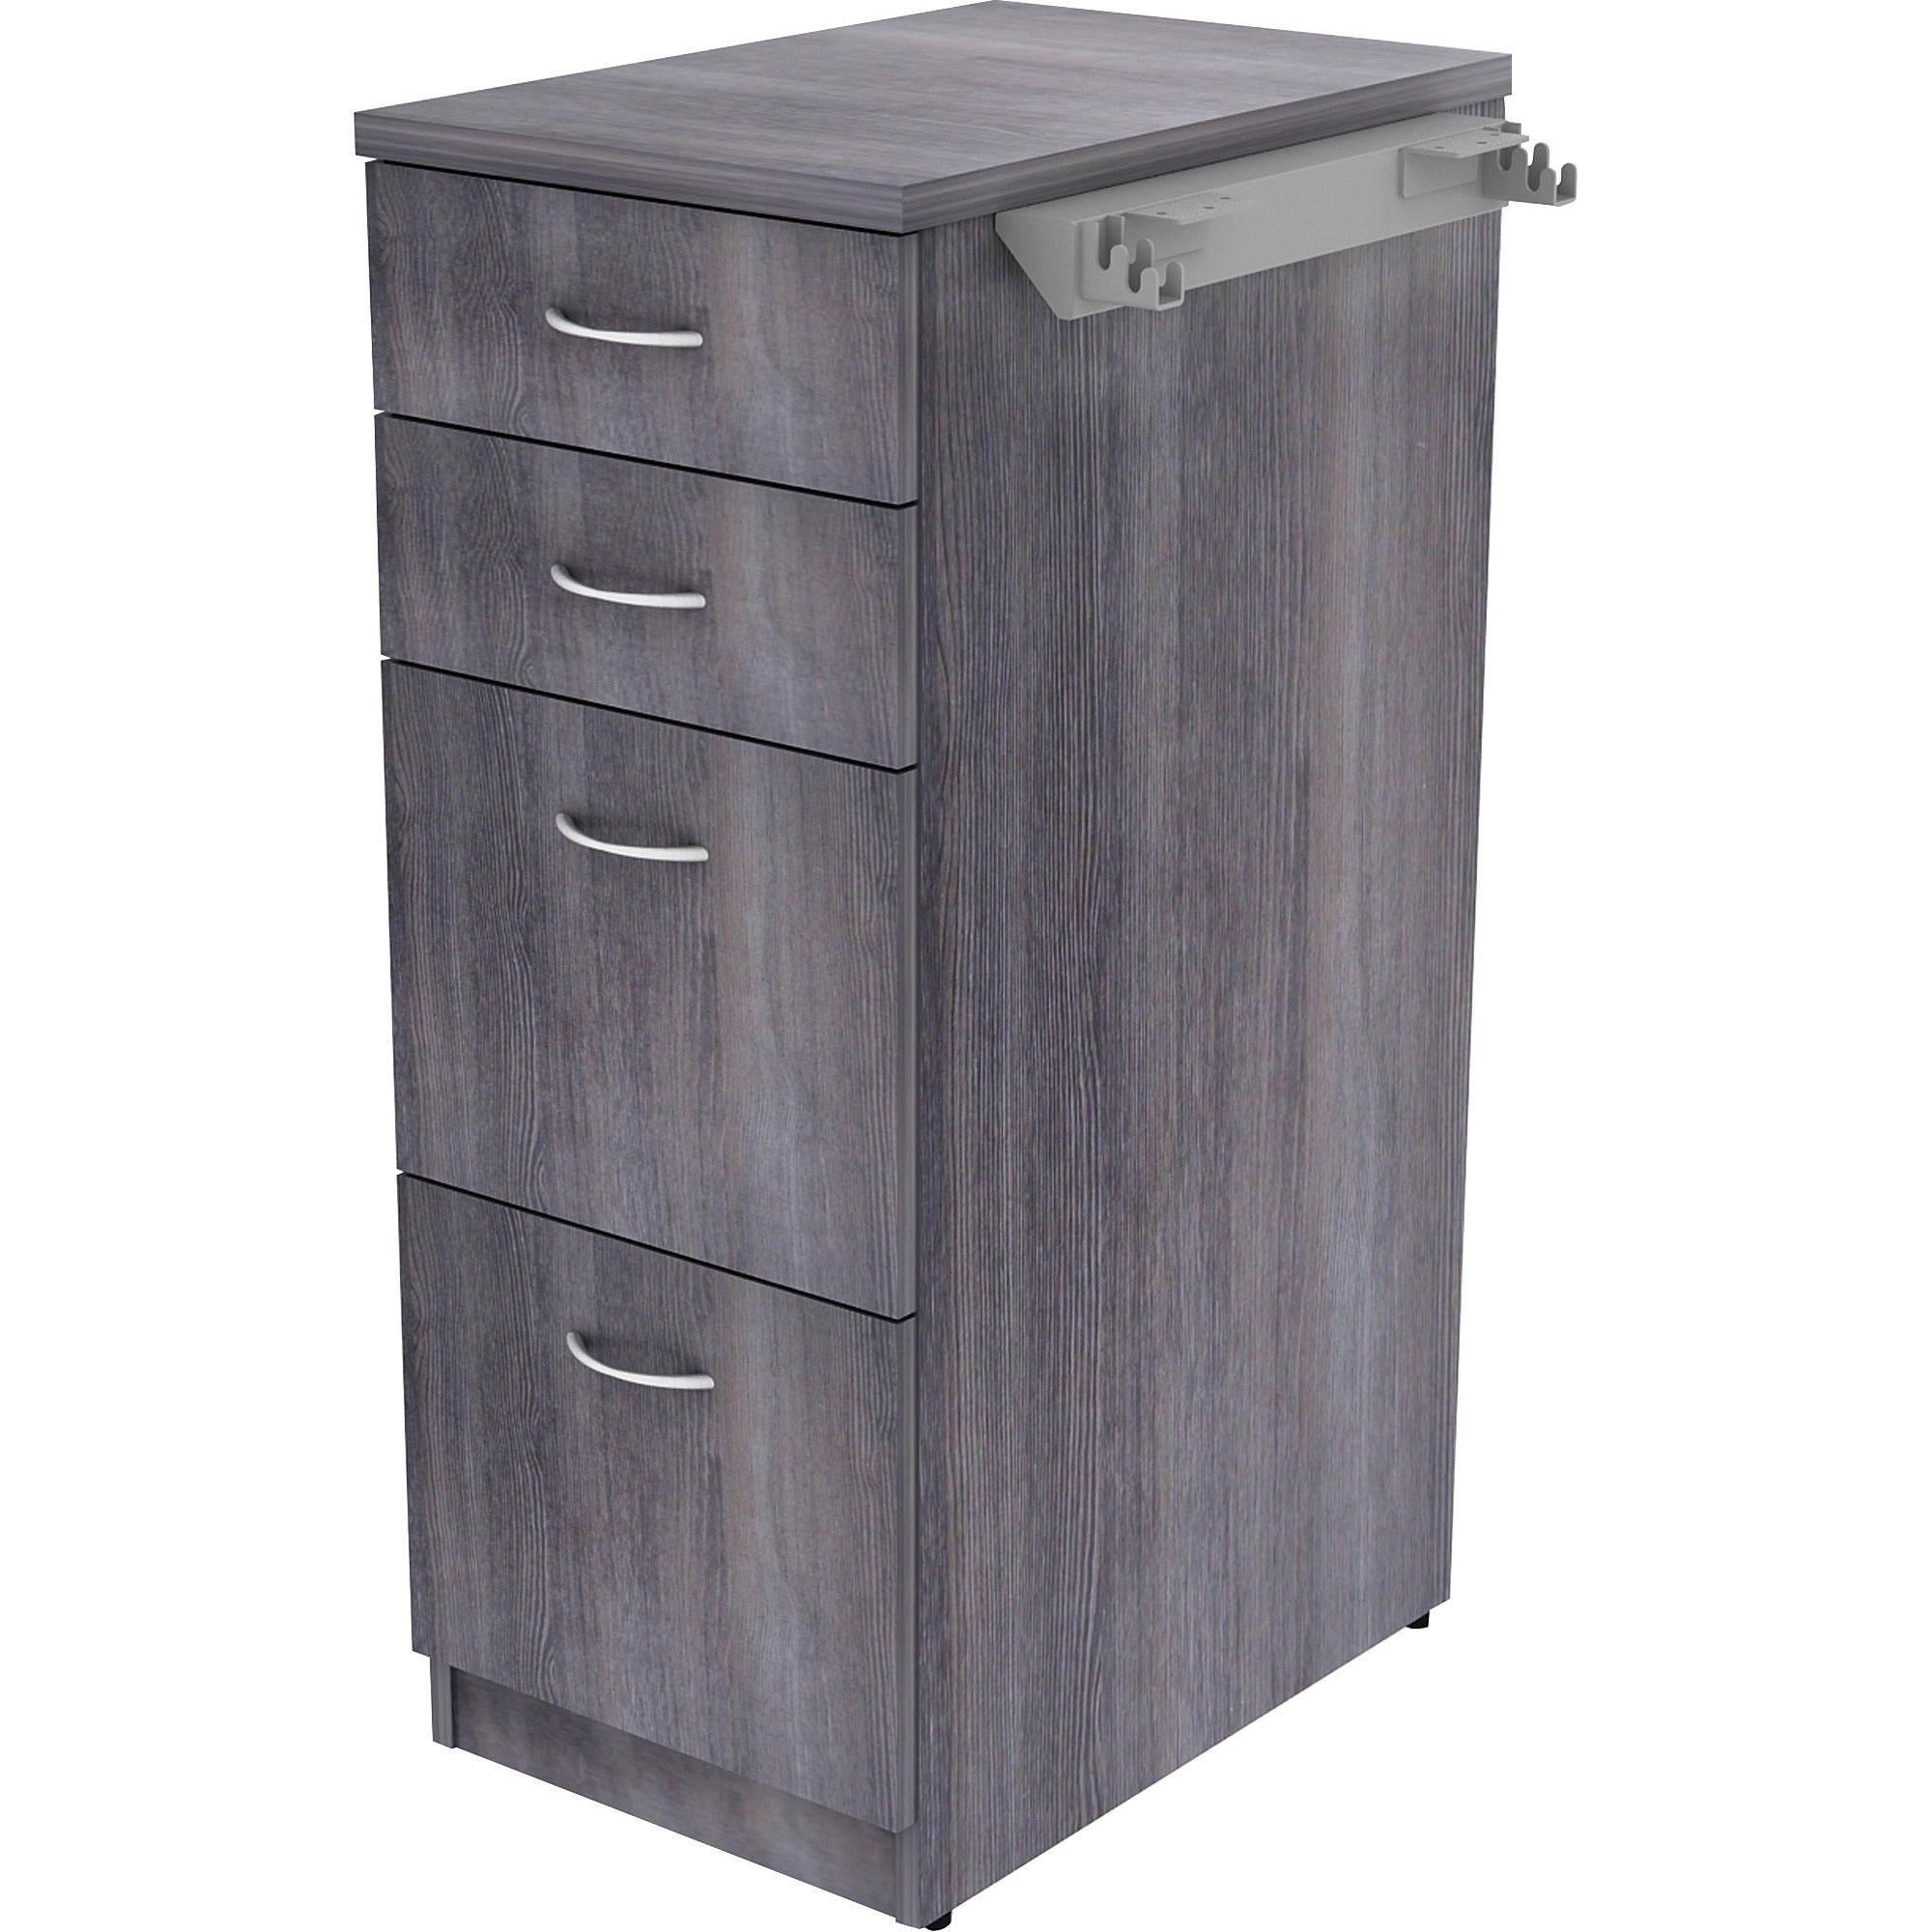 lorell-relevance-series-4-drawer-file-cabinet-155-x-236404-4-x-file-box-drawers-finish-charcoal-laminate_llr16211 - 3